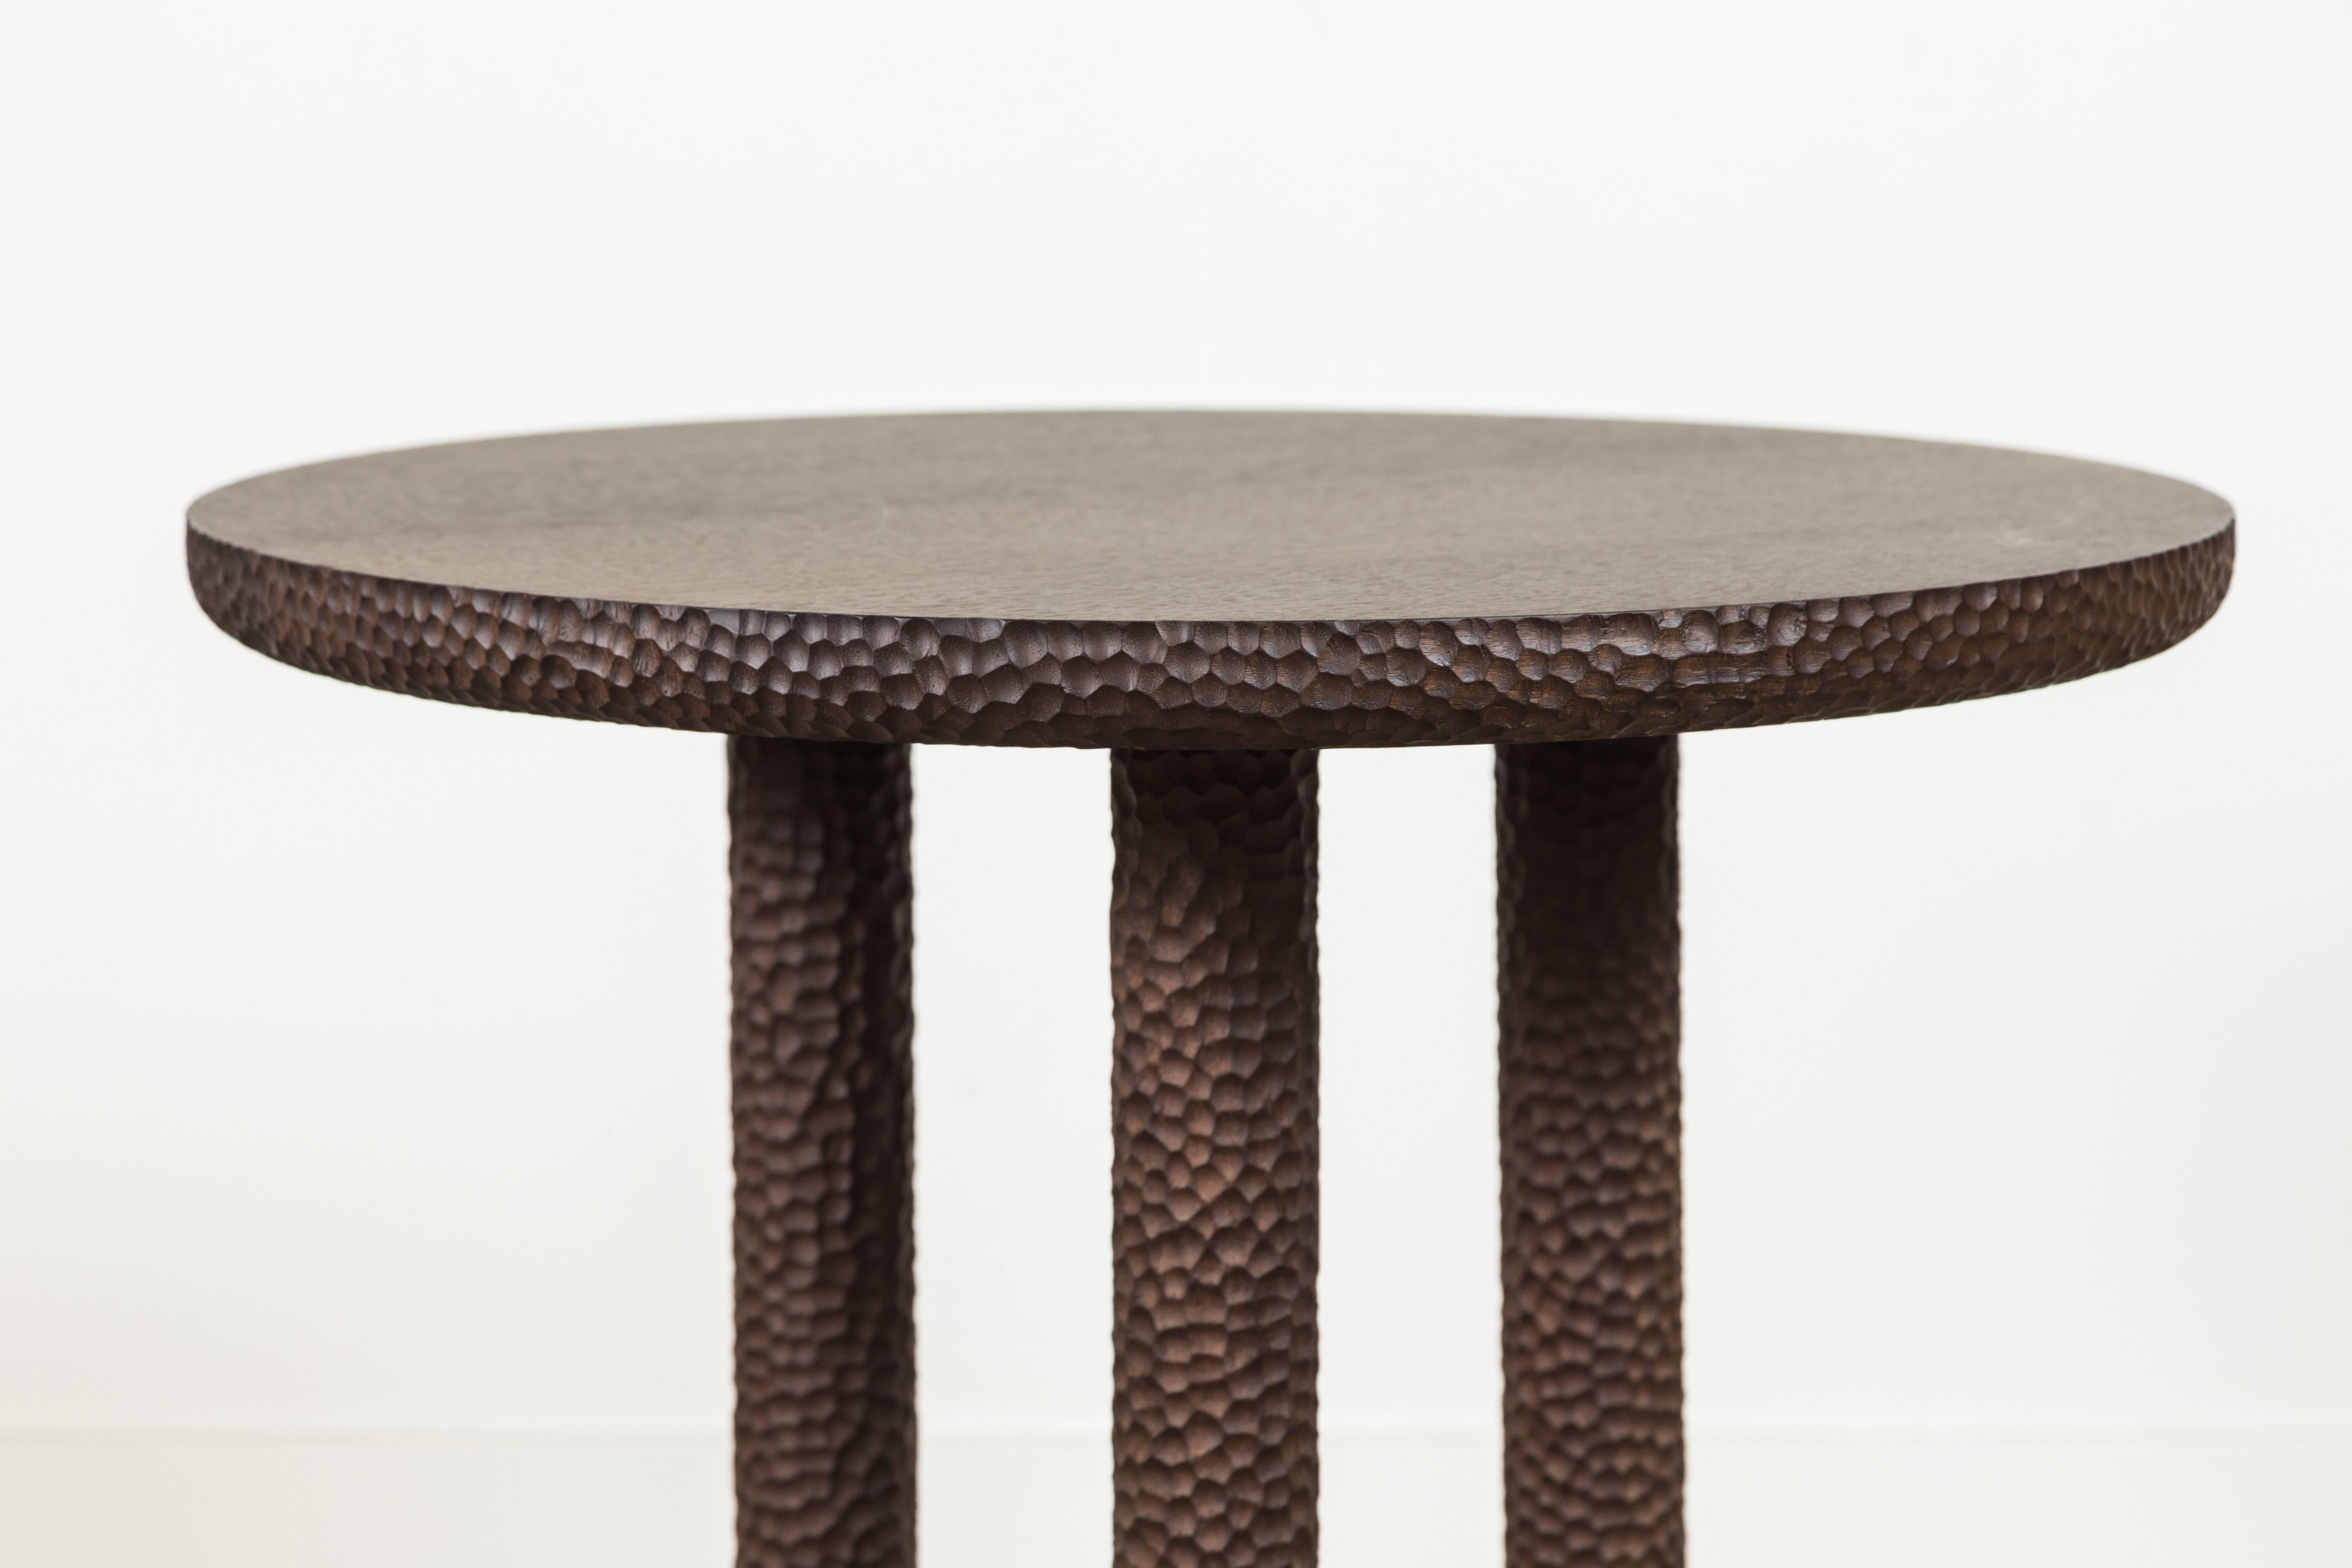 Rosae pedestal by Collection Particuliere. Solid Walnut. Hand tooled.